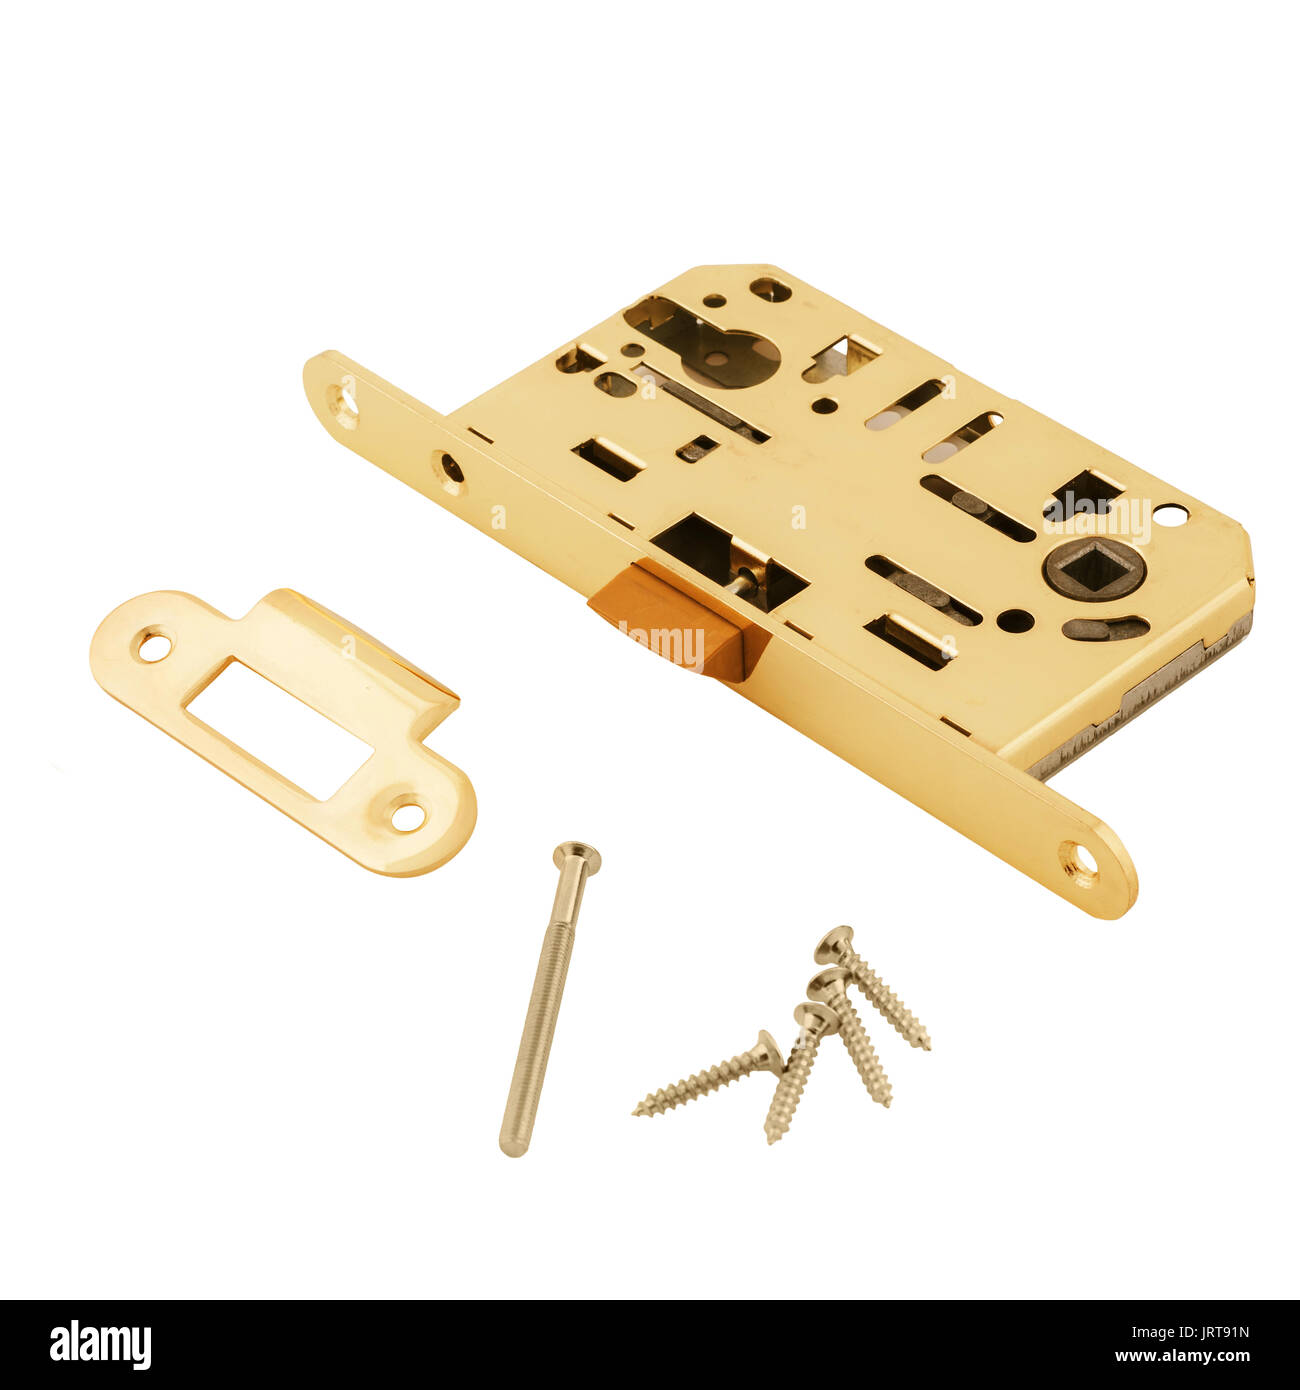 Door lock assembly on White Background Stock Photo - Alamy